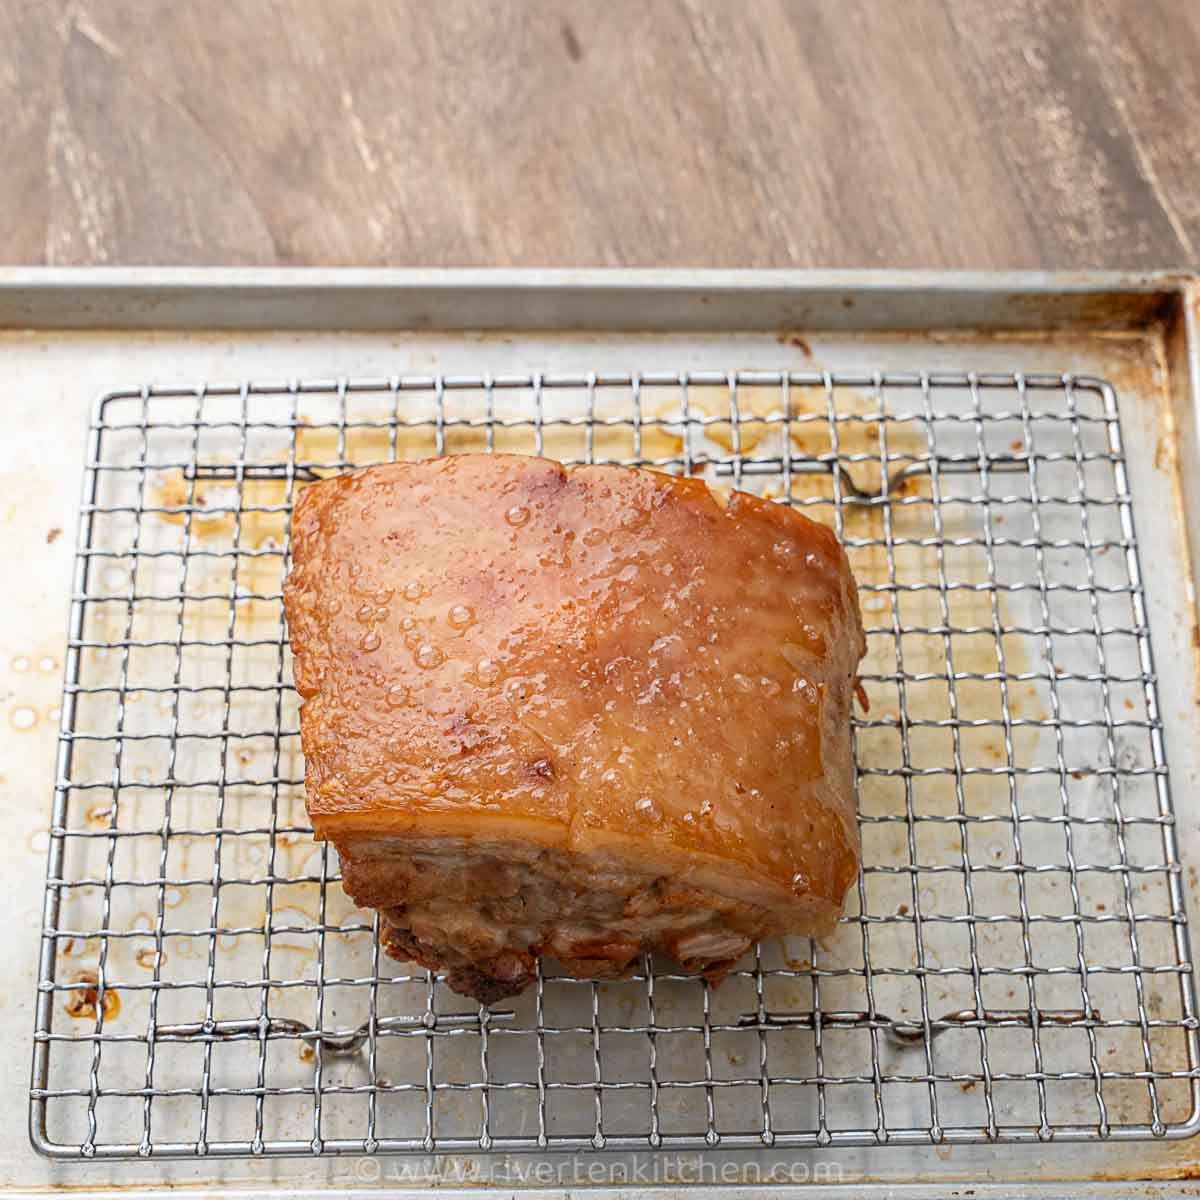 pork belly dehydrated in the oven.